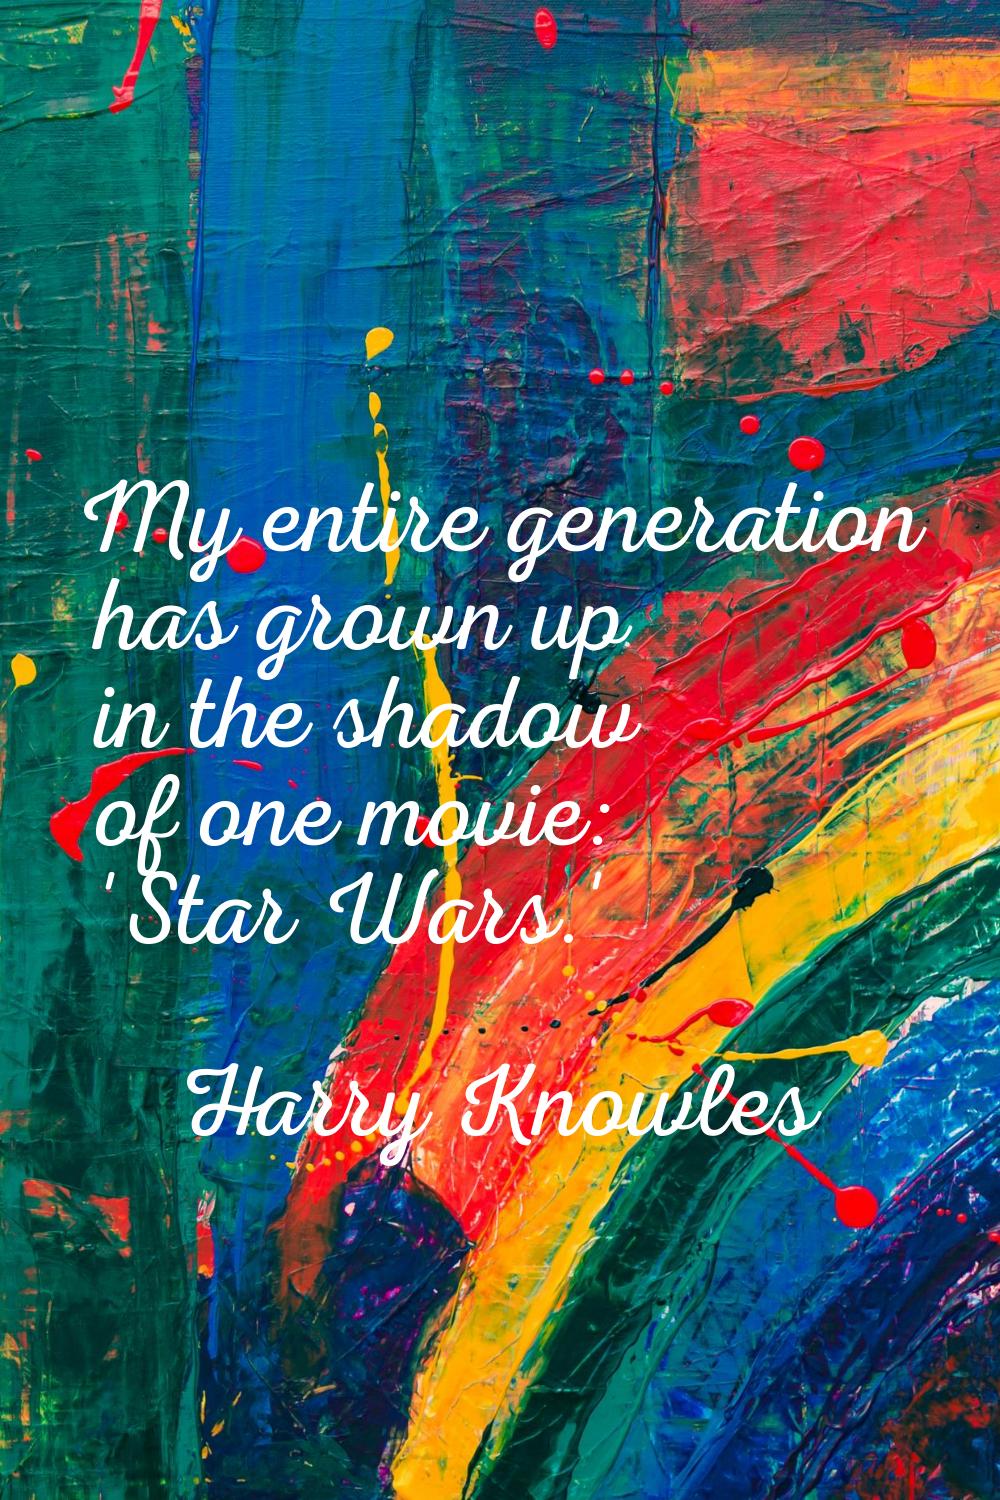 My entire generation has grown up in the shadow of one movie: 'Star Wars.'